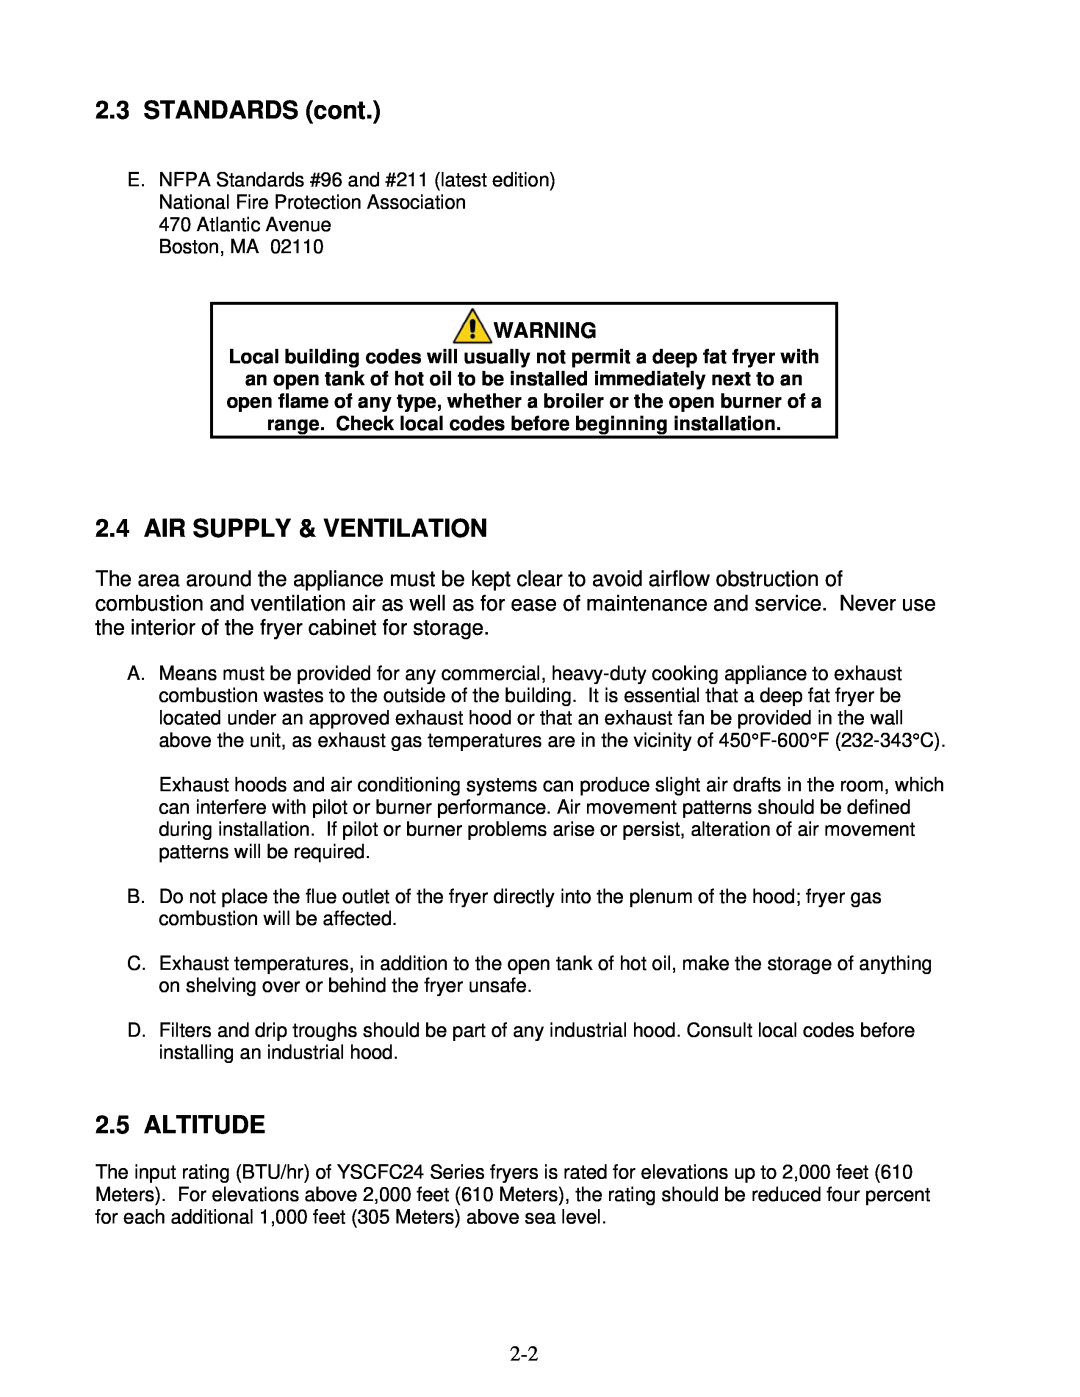 Frymaster YSCFC24 operation manual 2.3STANDARDS cont, Air Supply & Ventilation, Altitude 